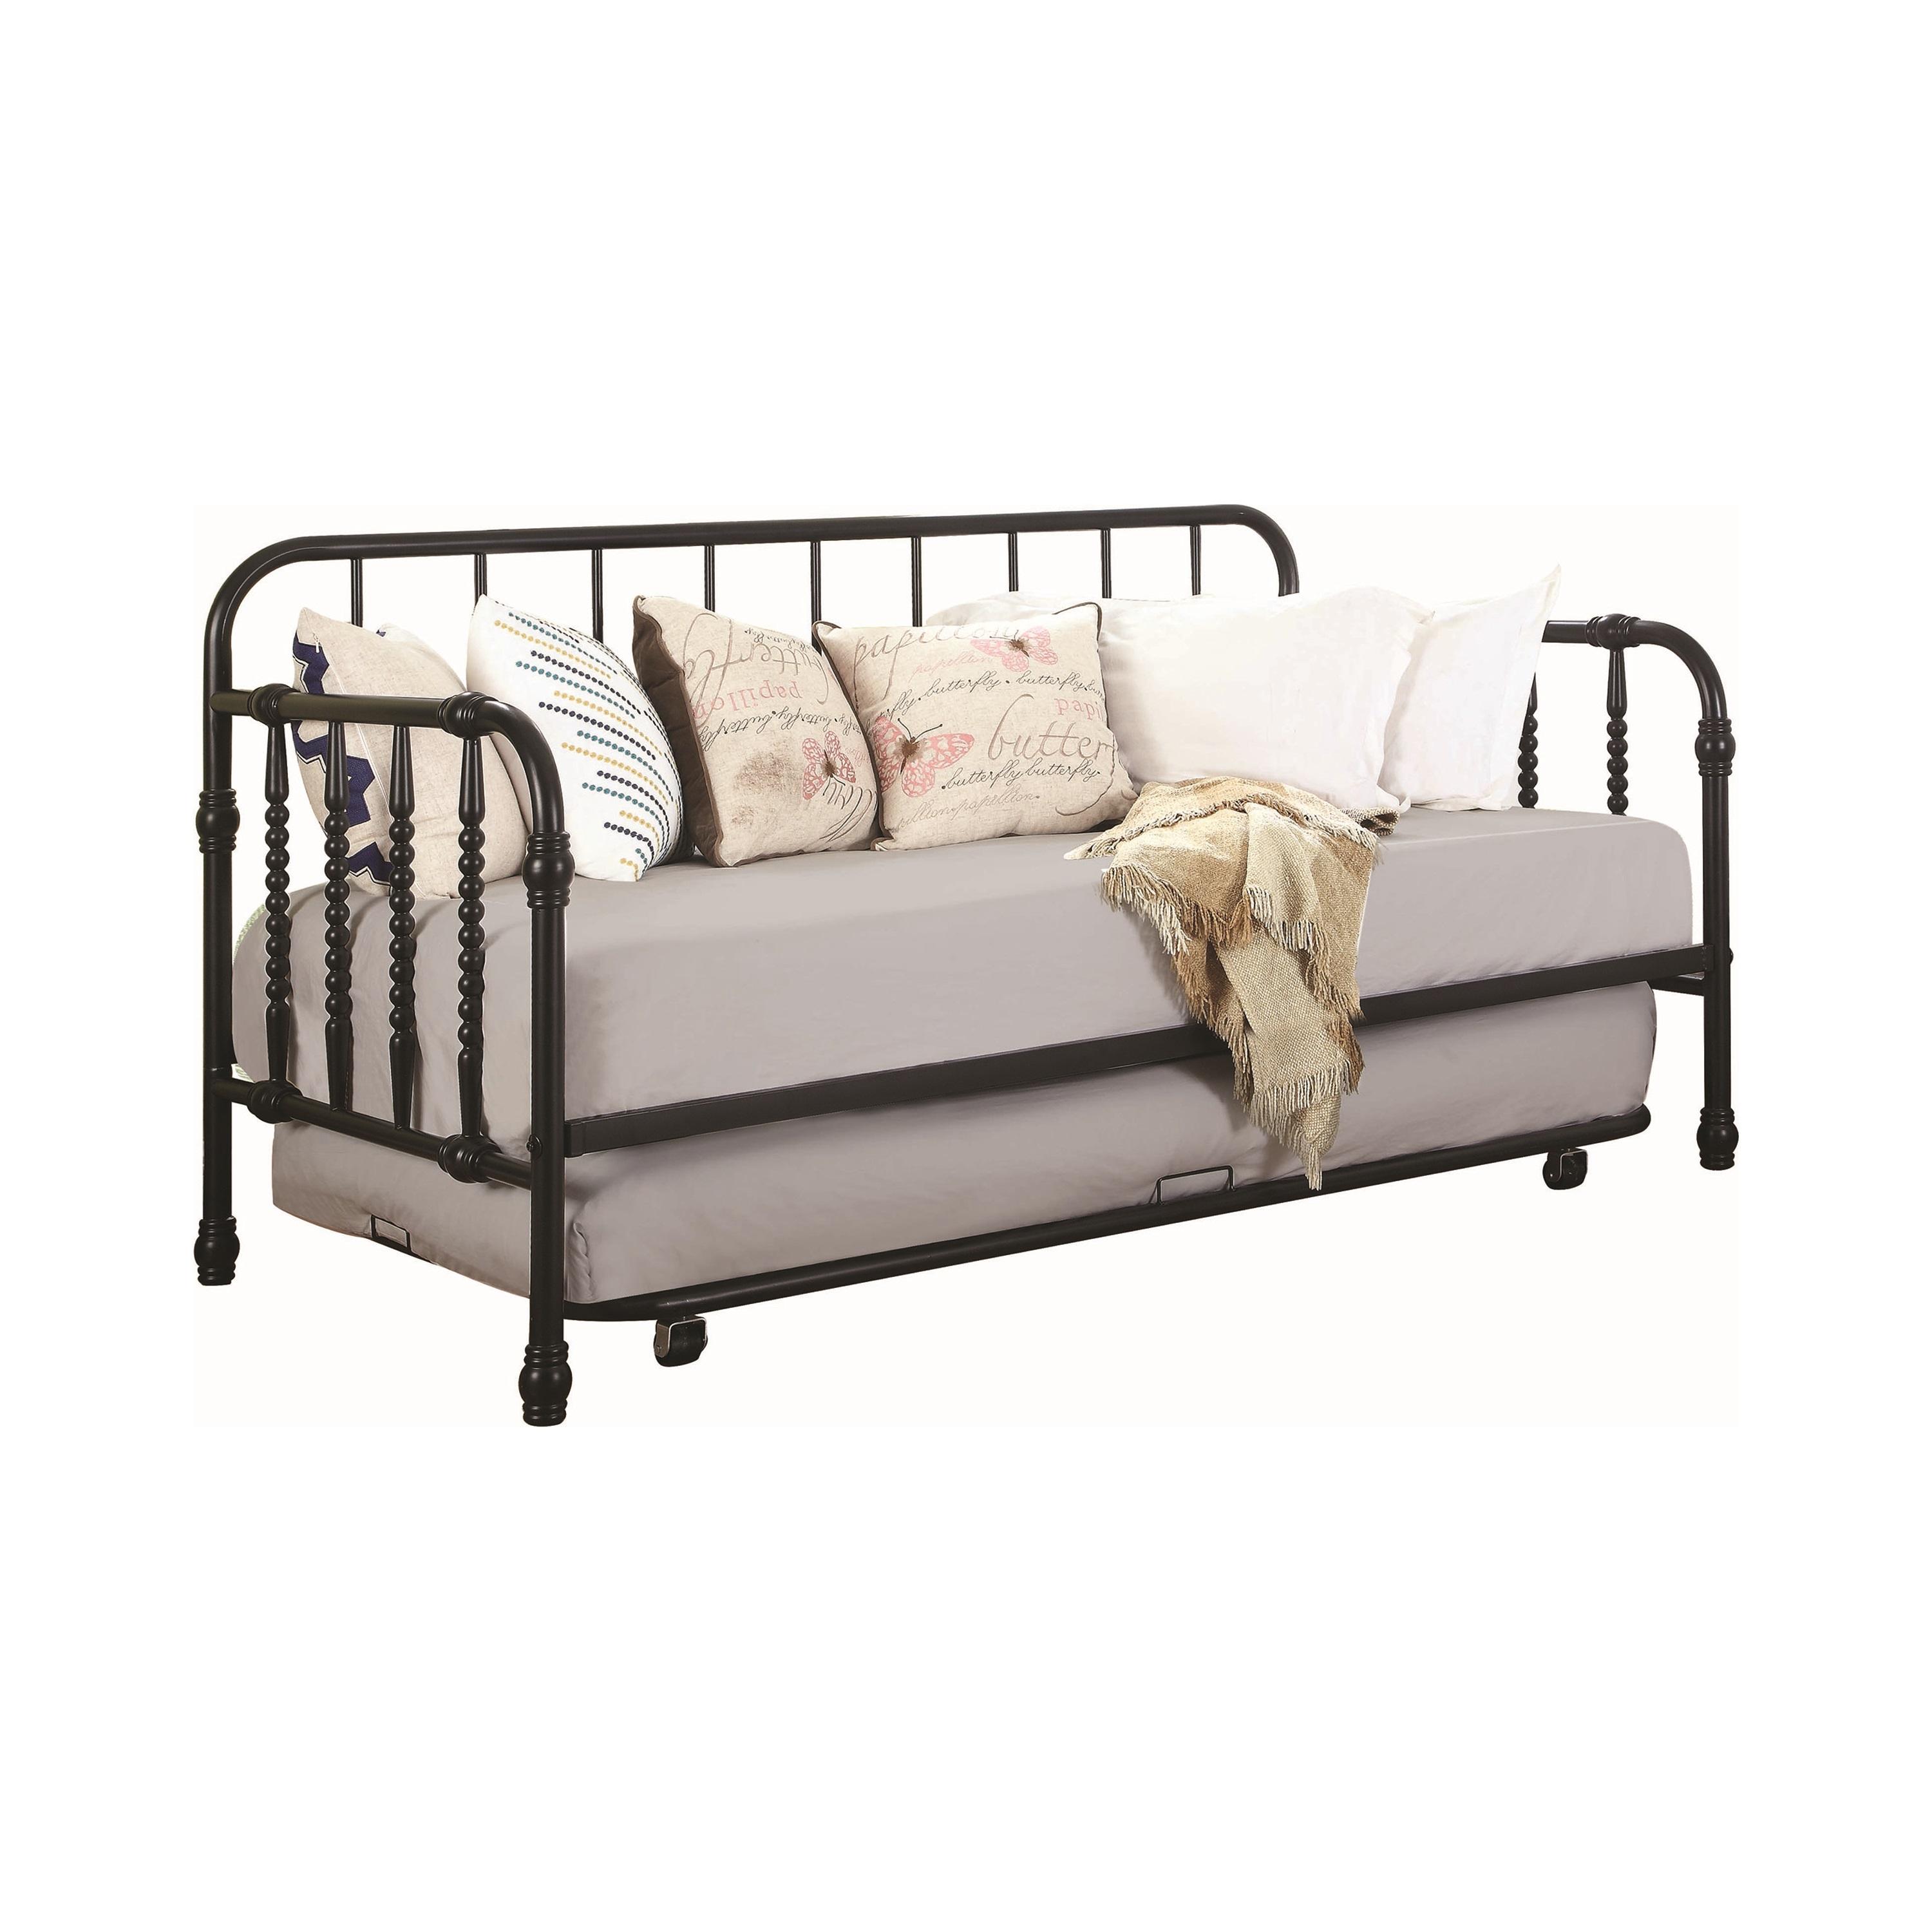 Transitional Daybed w/Trundle 300765 300765 in Black 